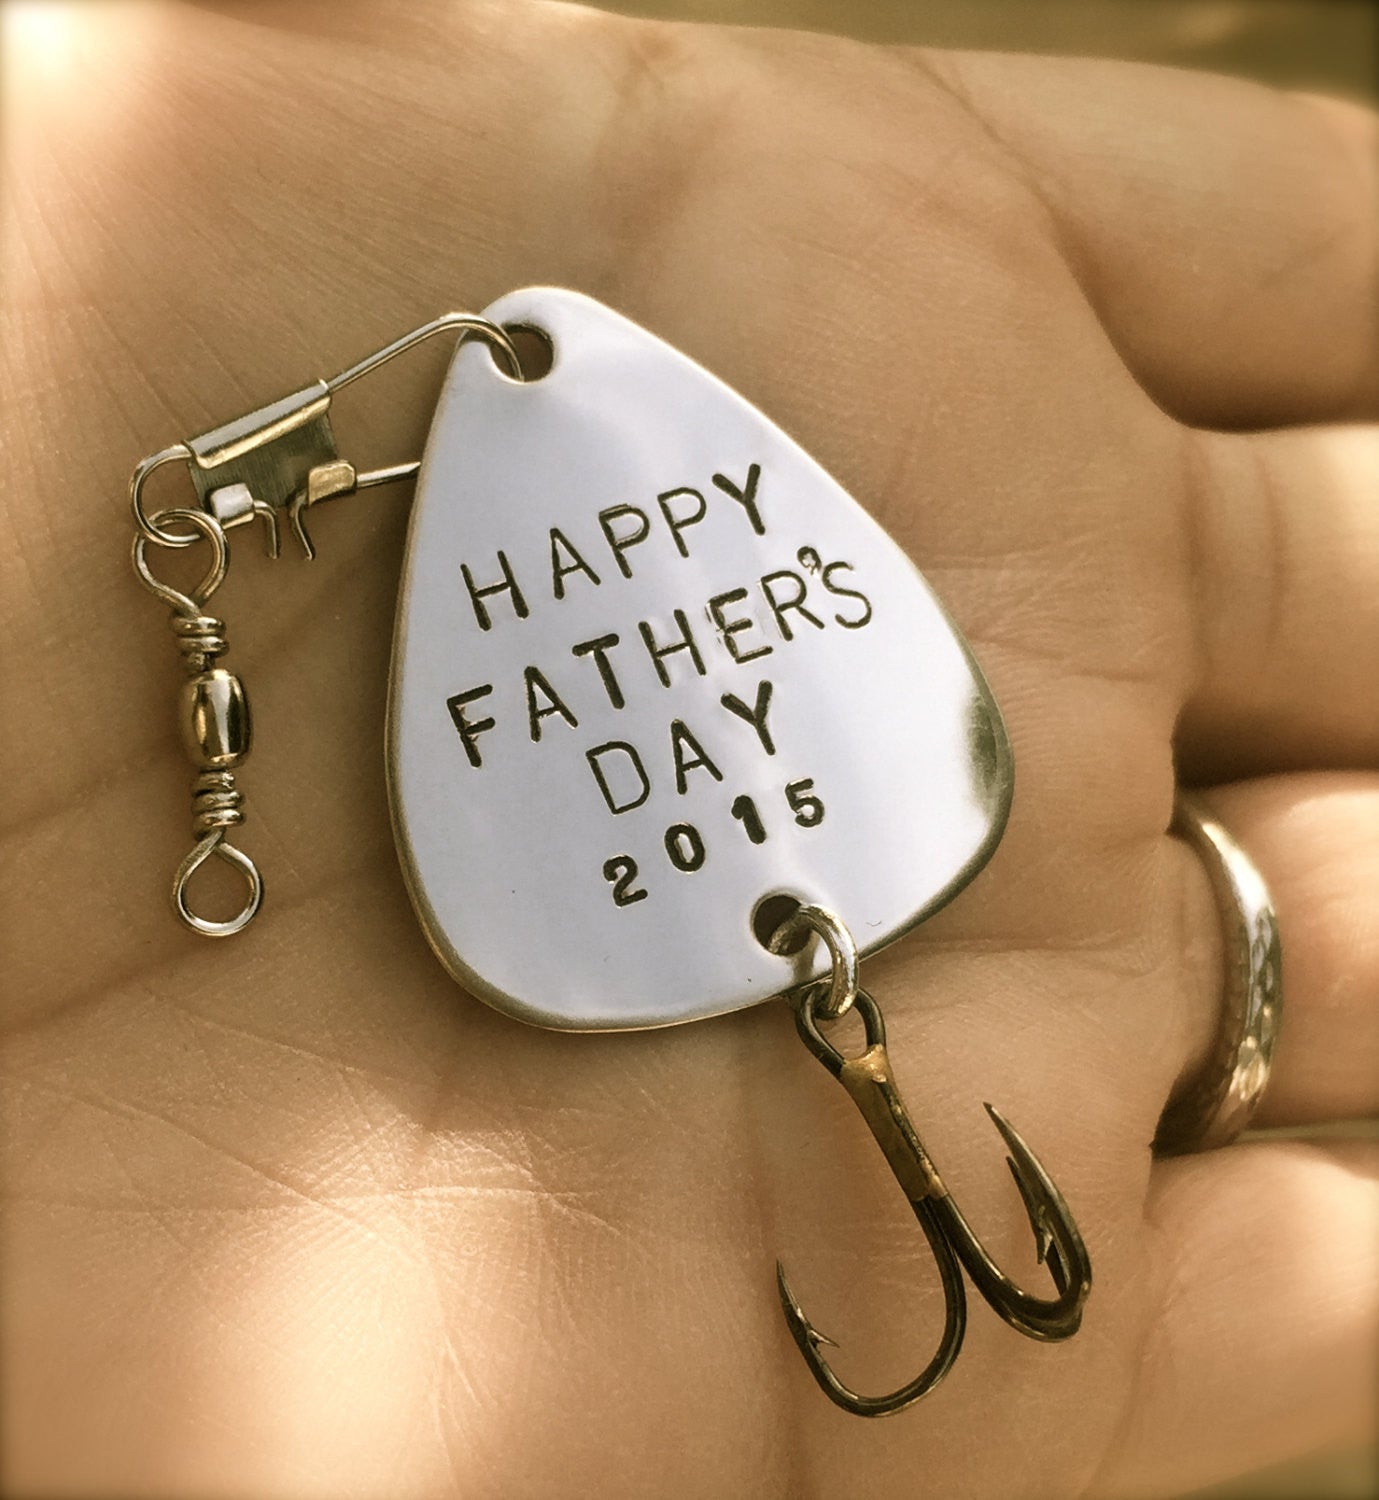 Personalized Fishing Lure, Happy Fathers Day, My Best Catch, I'm hooked on you, Valentines Gift Men, natashaaloha - Natashaaloha, jewelry, bracelets, necklace, keychains, fishing lures, gifts for men, charms, personalized, 